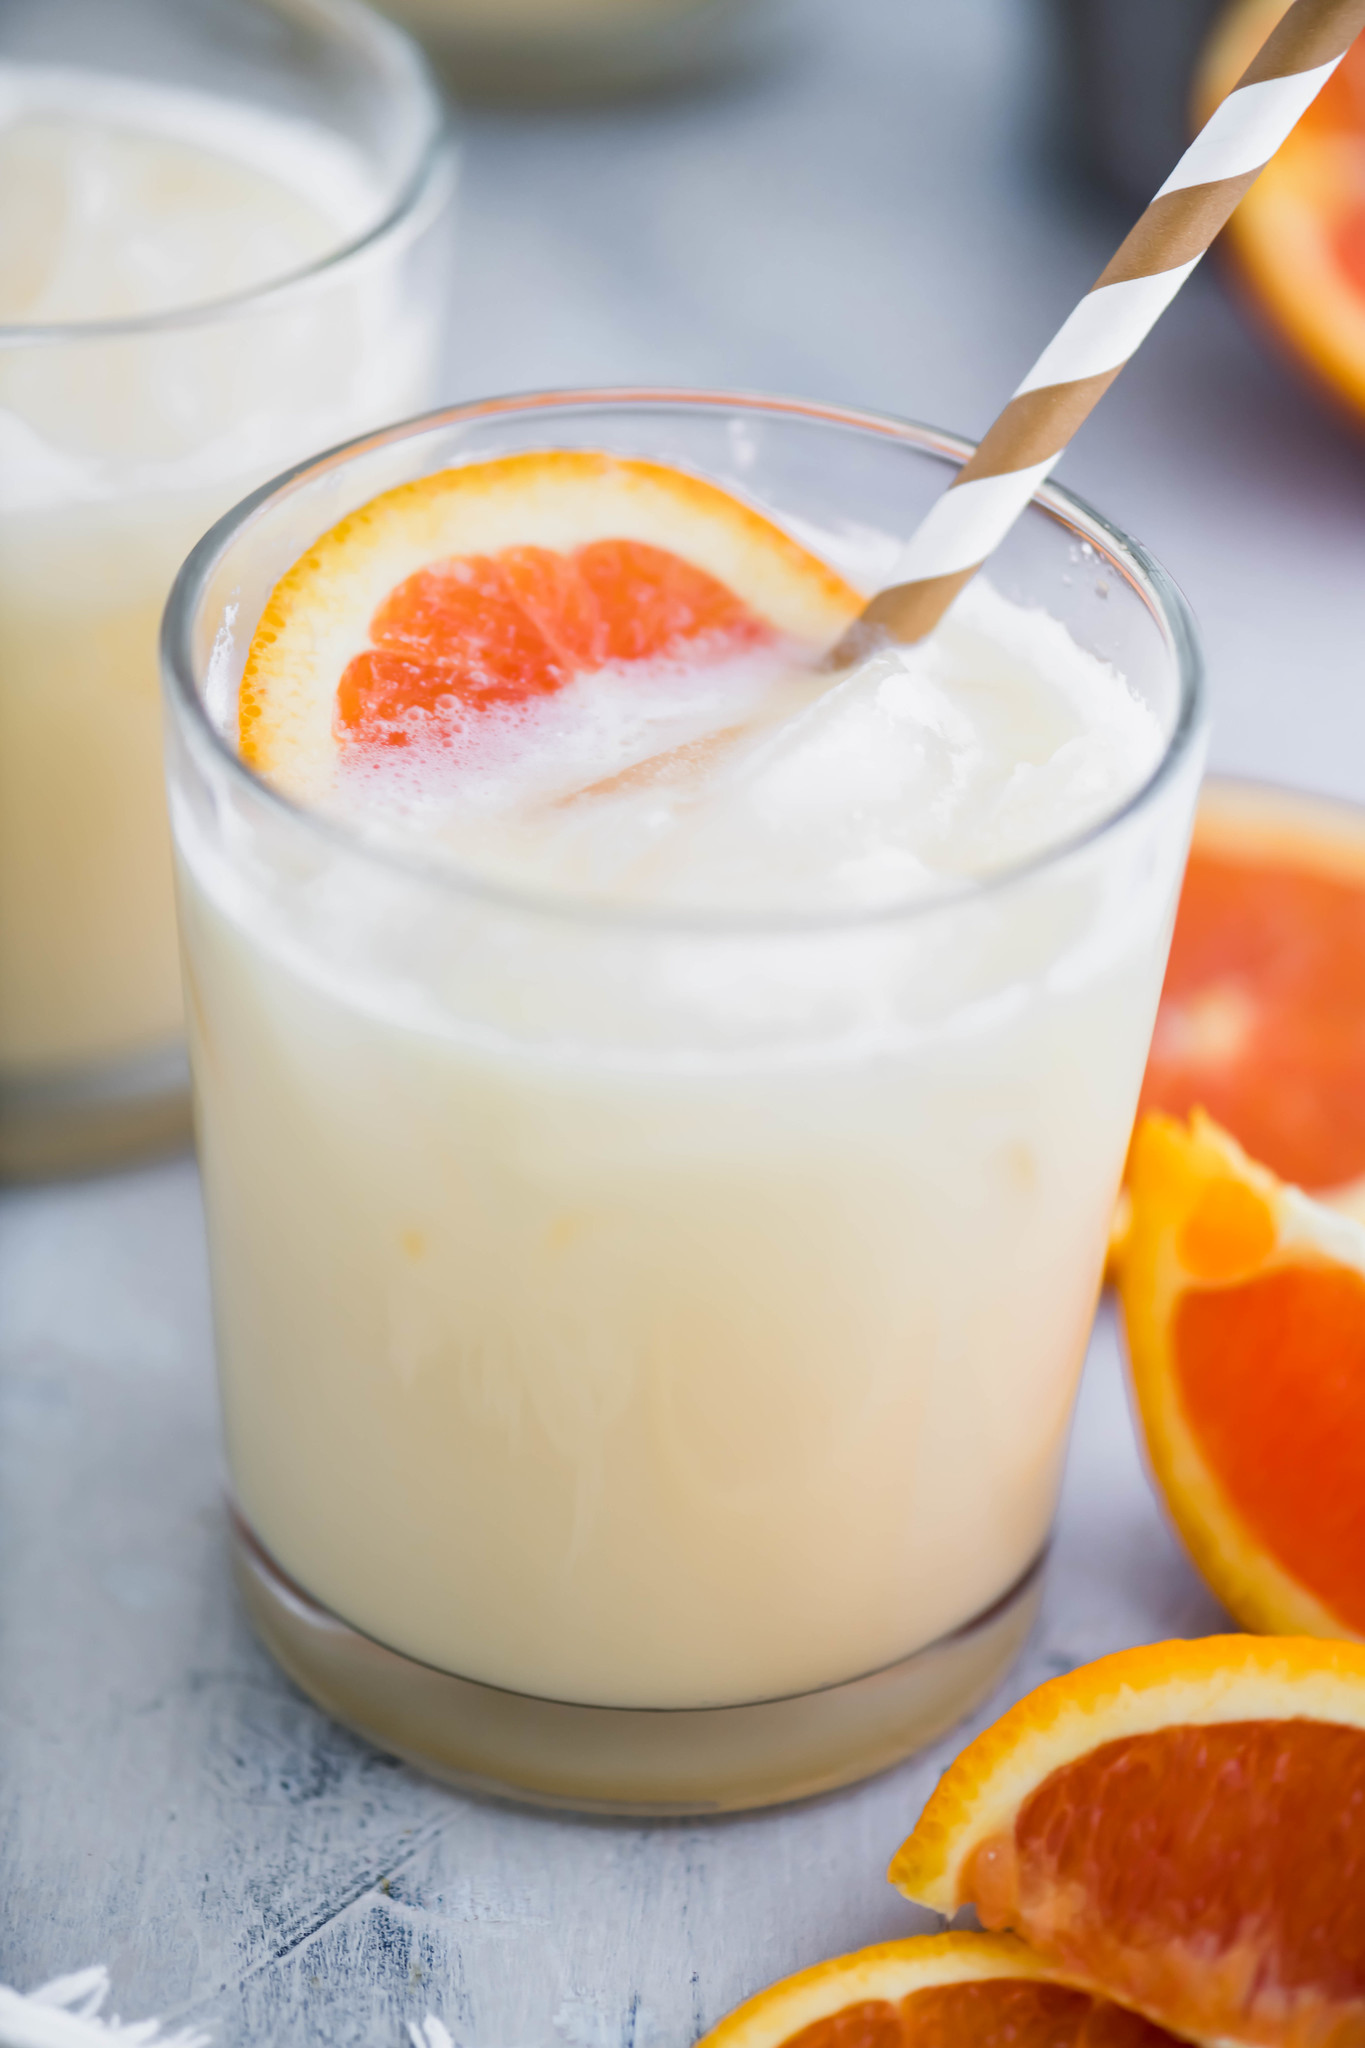 Cocktail glass filled with creamsicle cocktail with an orange slice floating in the glass.